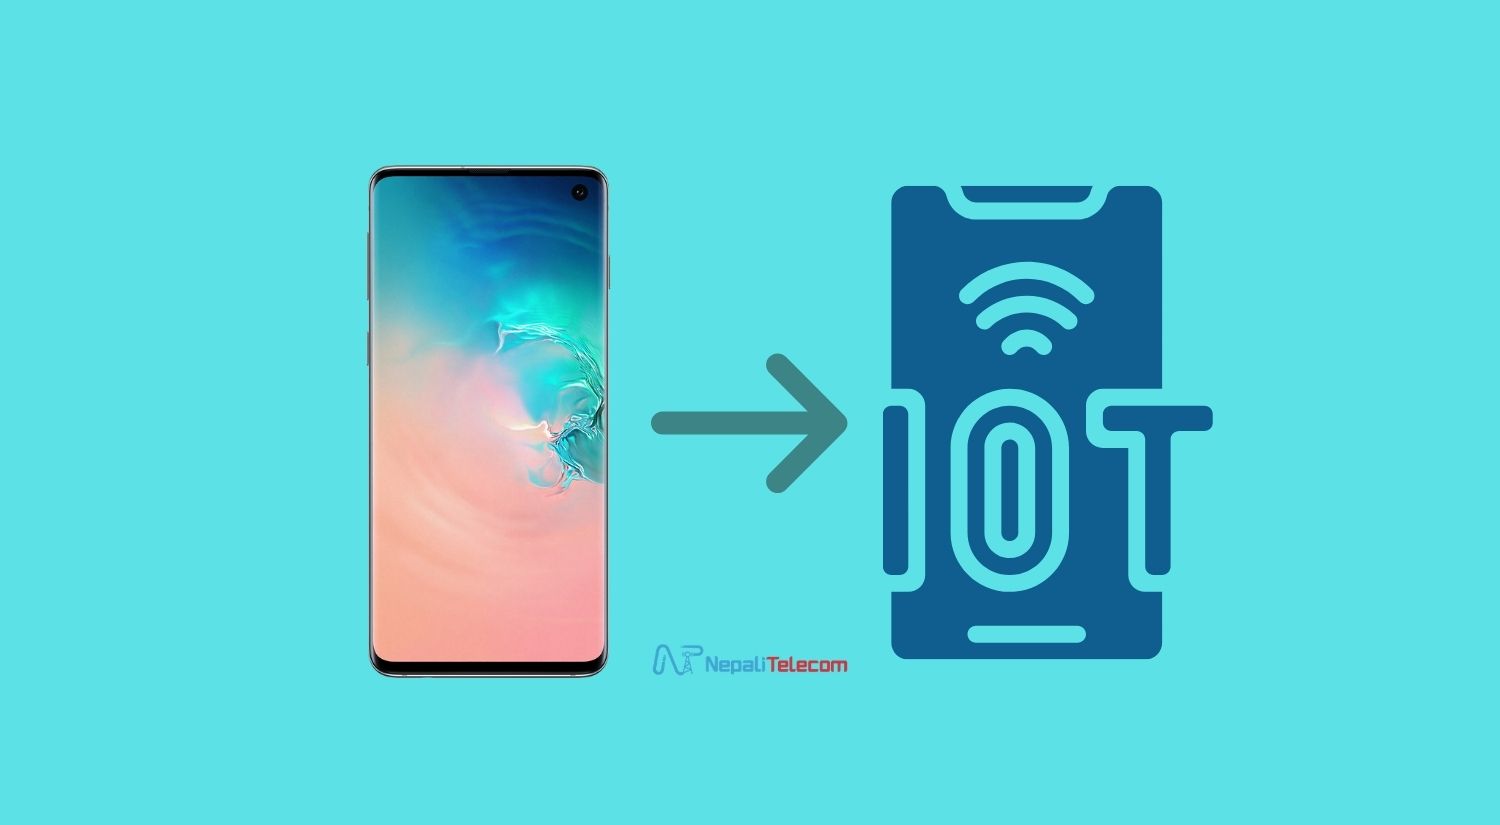 Samsung flagship convert to IoT Upcycling